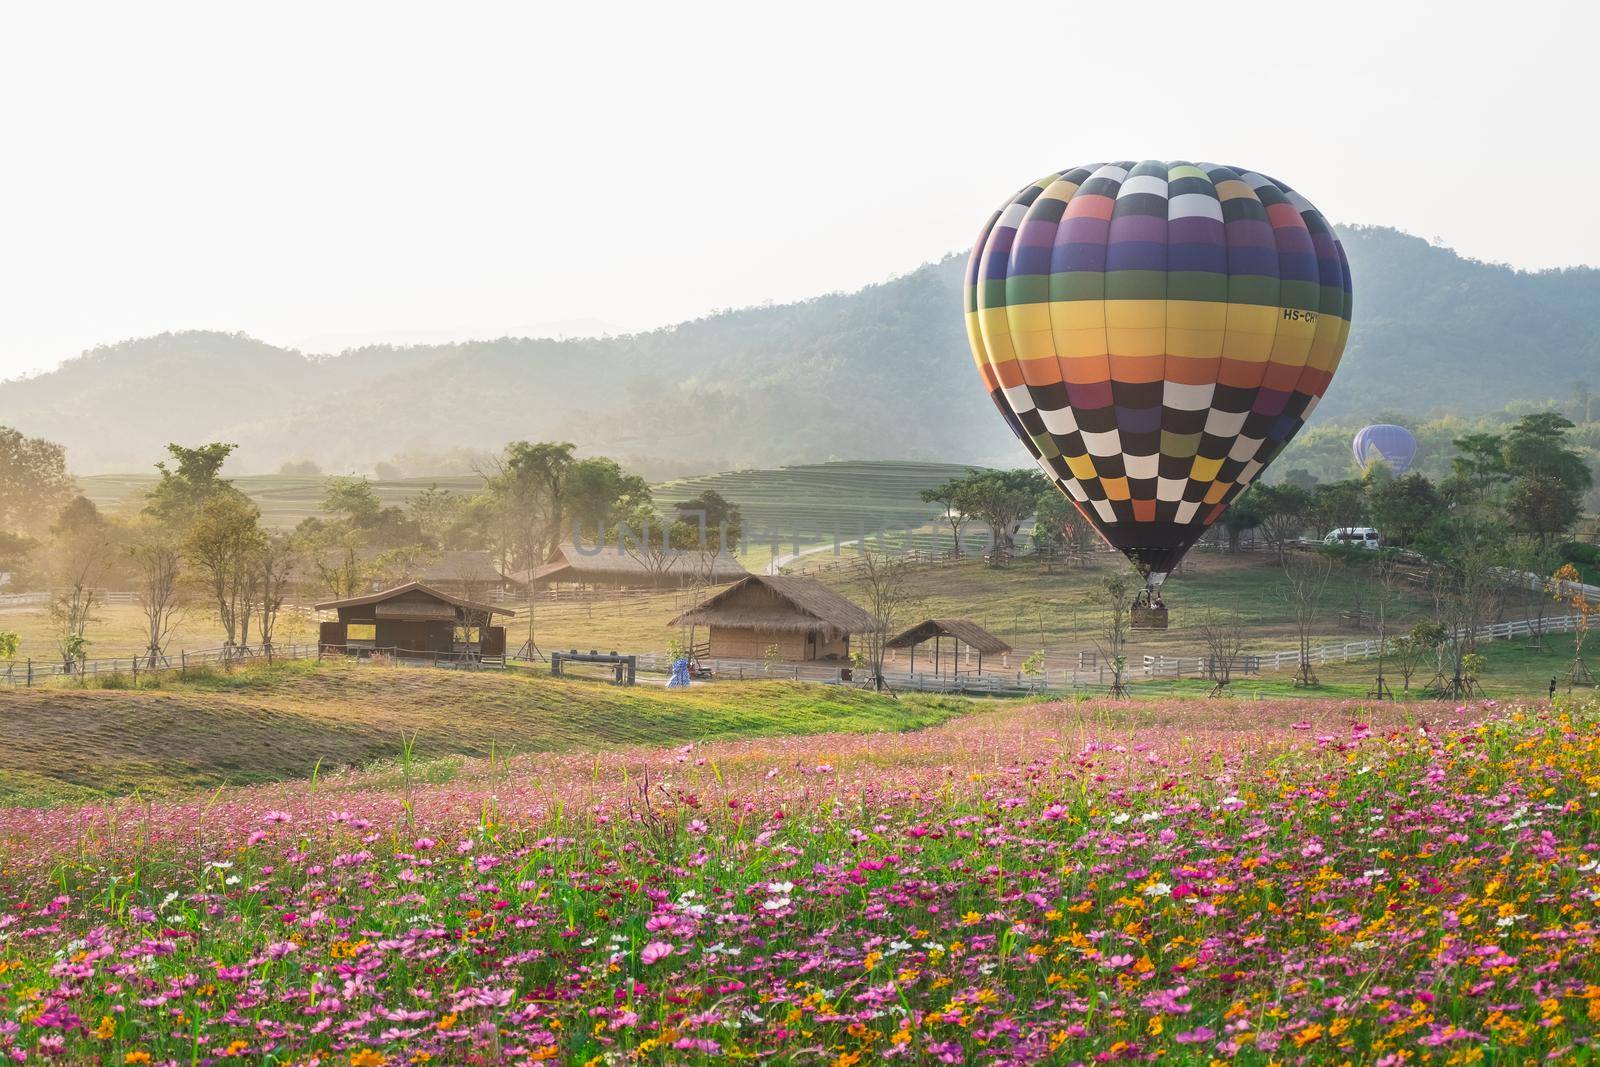 The hot air balloons flying over the cosmos flowers field in Singha park international balloons fiesta 2017 in Chiang Rai province of Thailand. by Wmpix